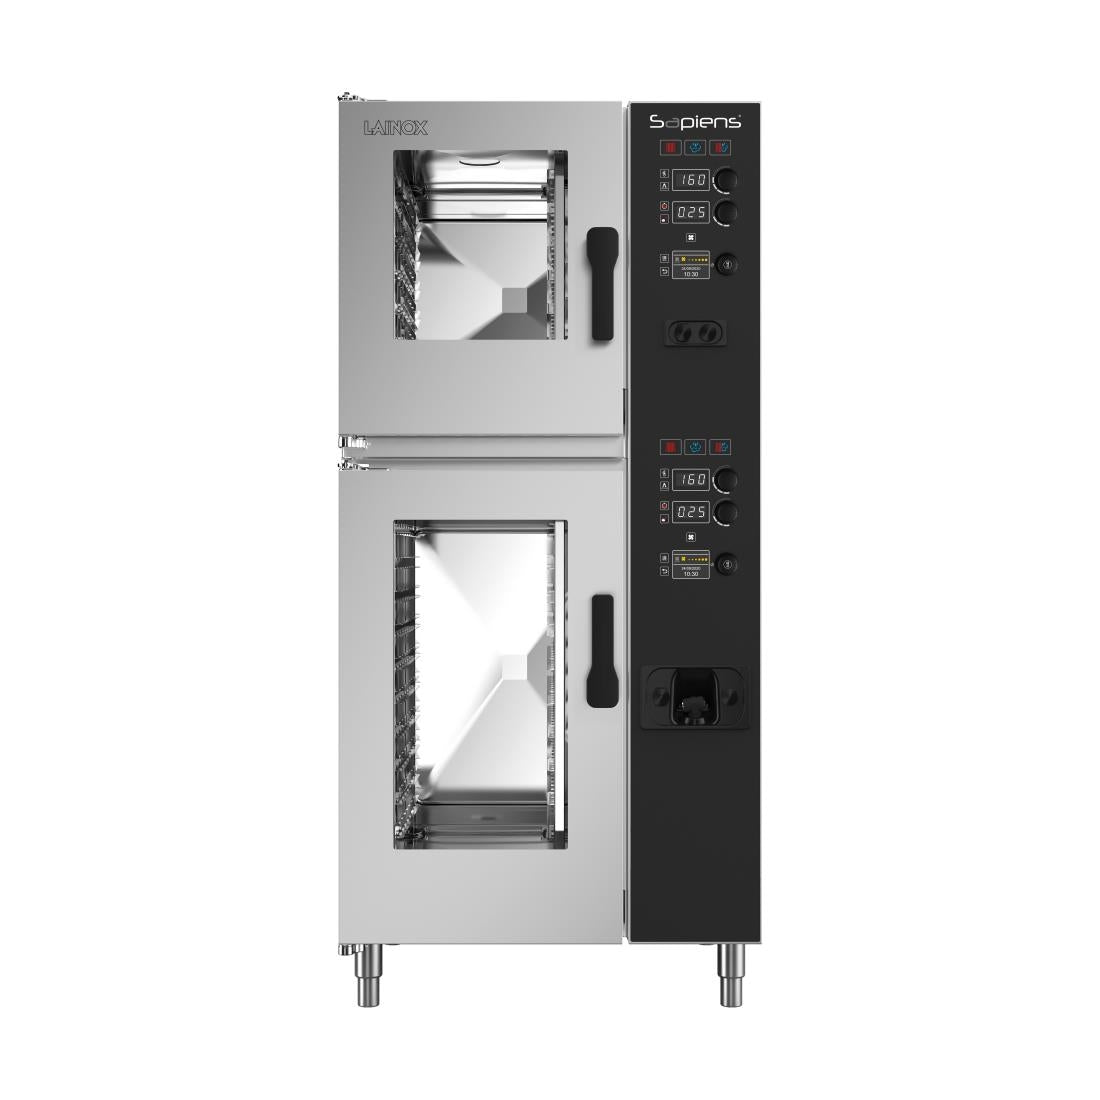 HP570 Lainox Sapiens Boosted Electric Touch Screen Combi Oven SAE161BS 16X1/1GN JD Catering Equipment Solutions Ltd